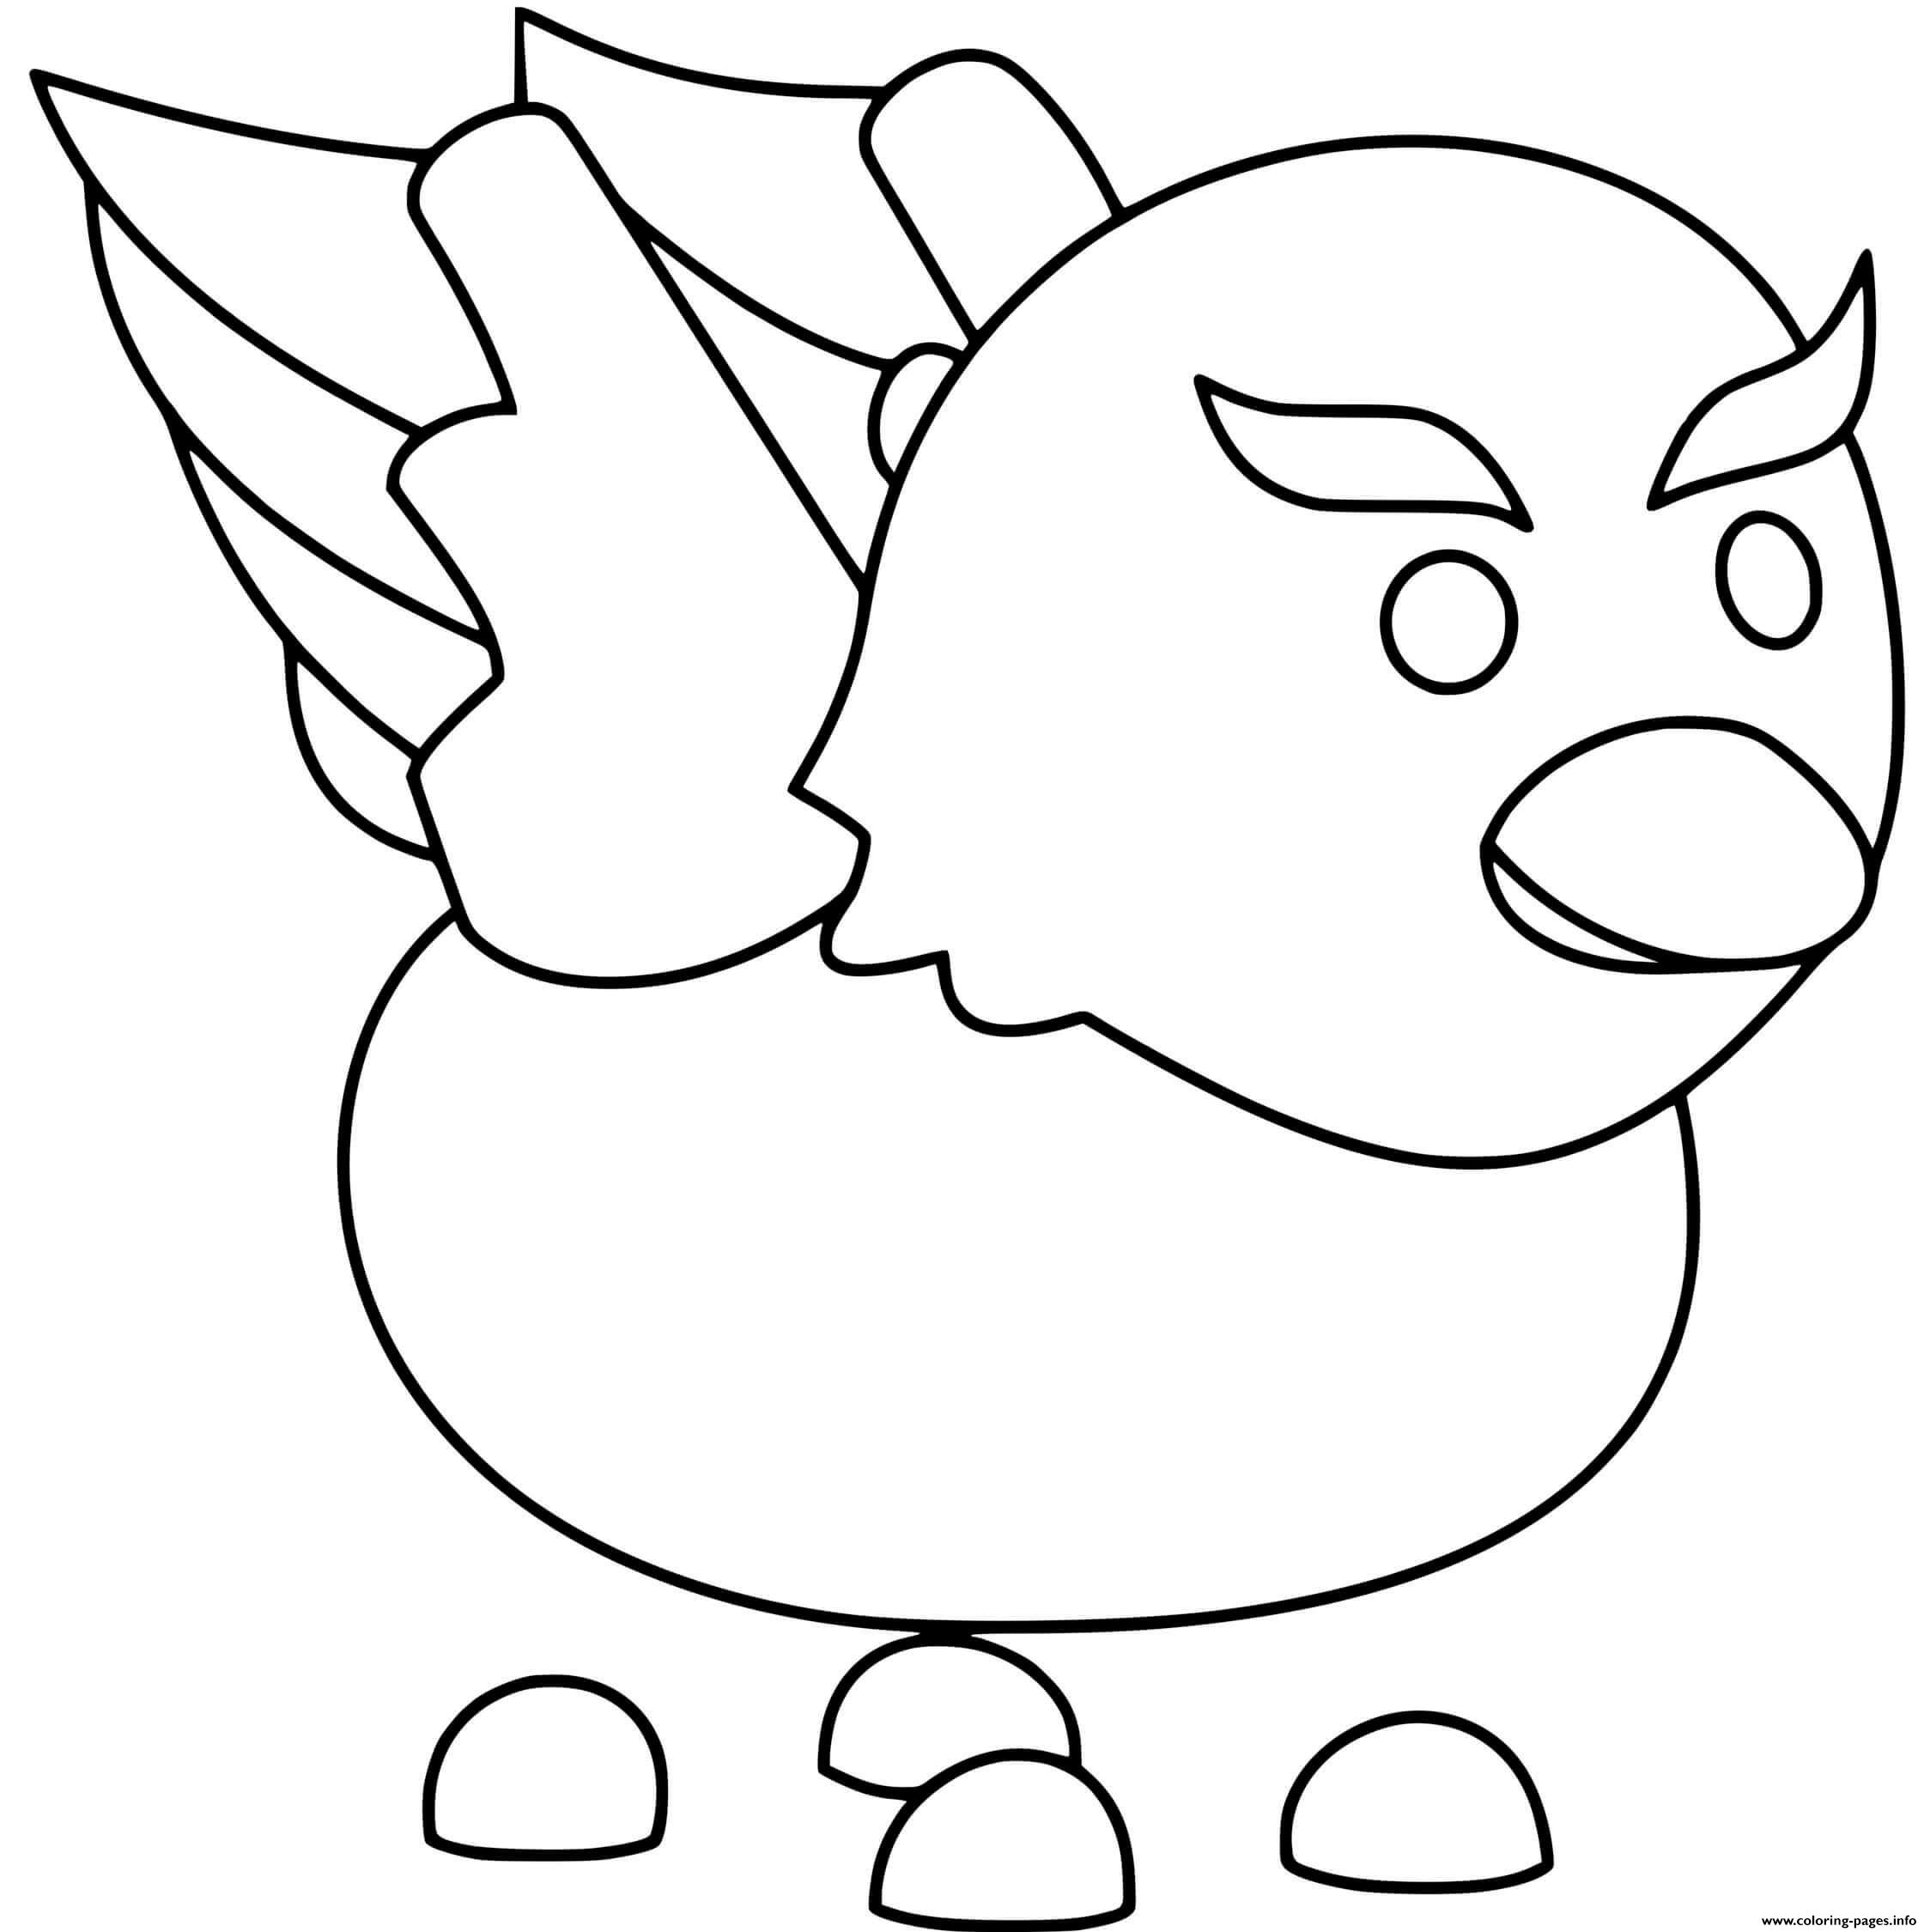 Roblox Adopt Me Griffin Coloring Pages Printable - dragon roblox coloring pages adopt me